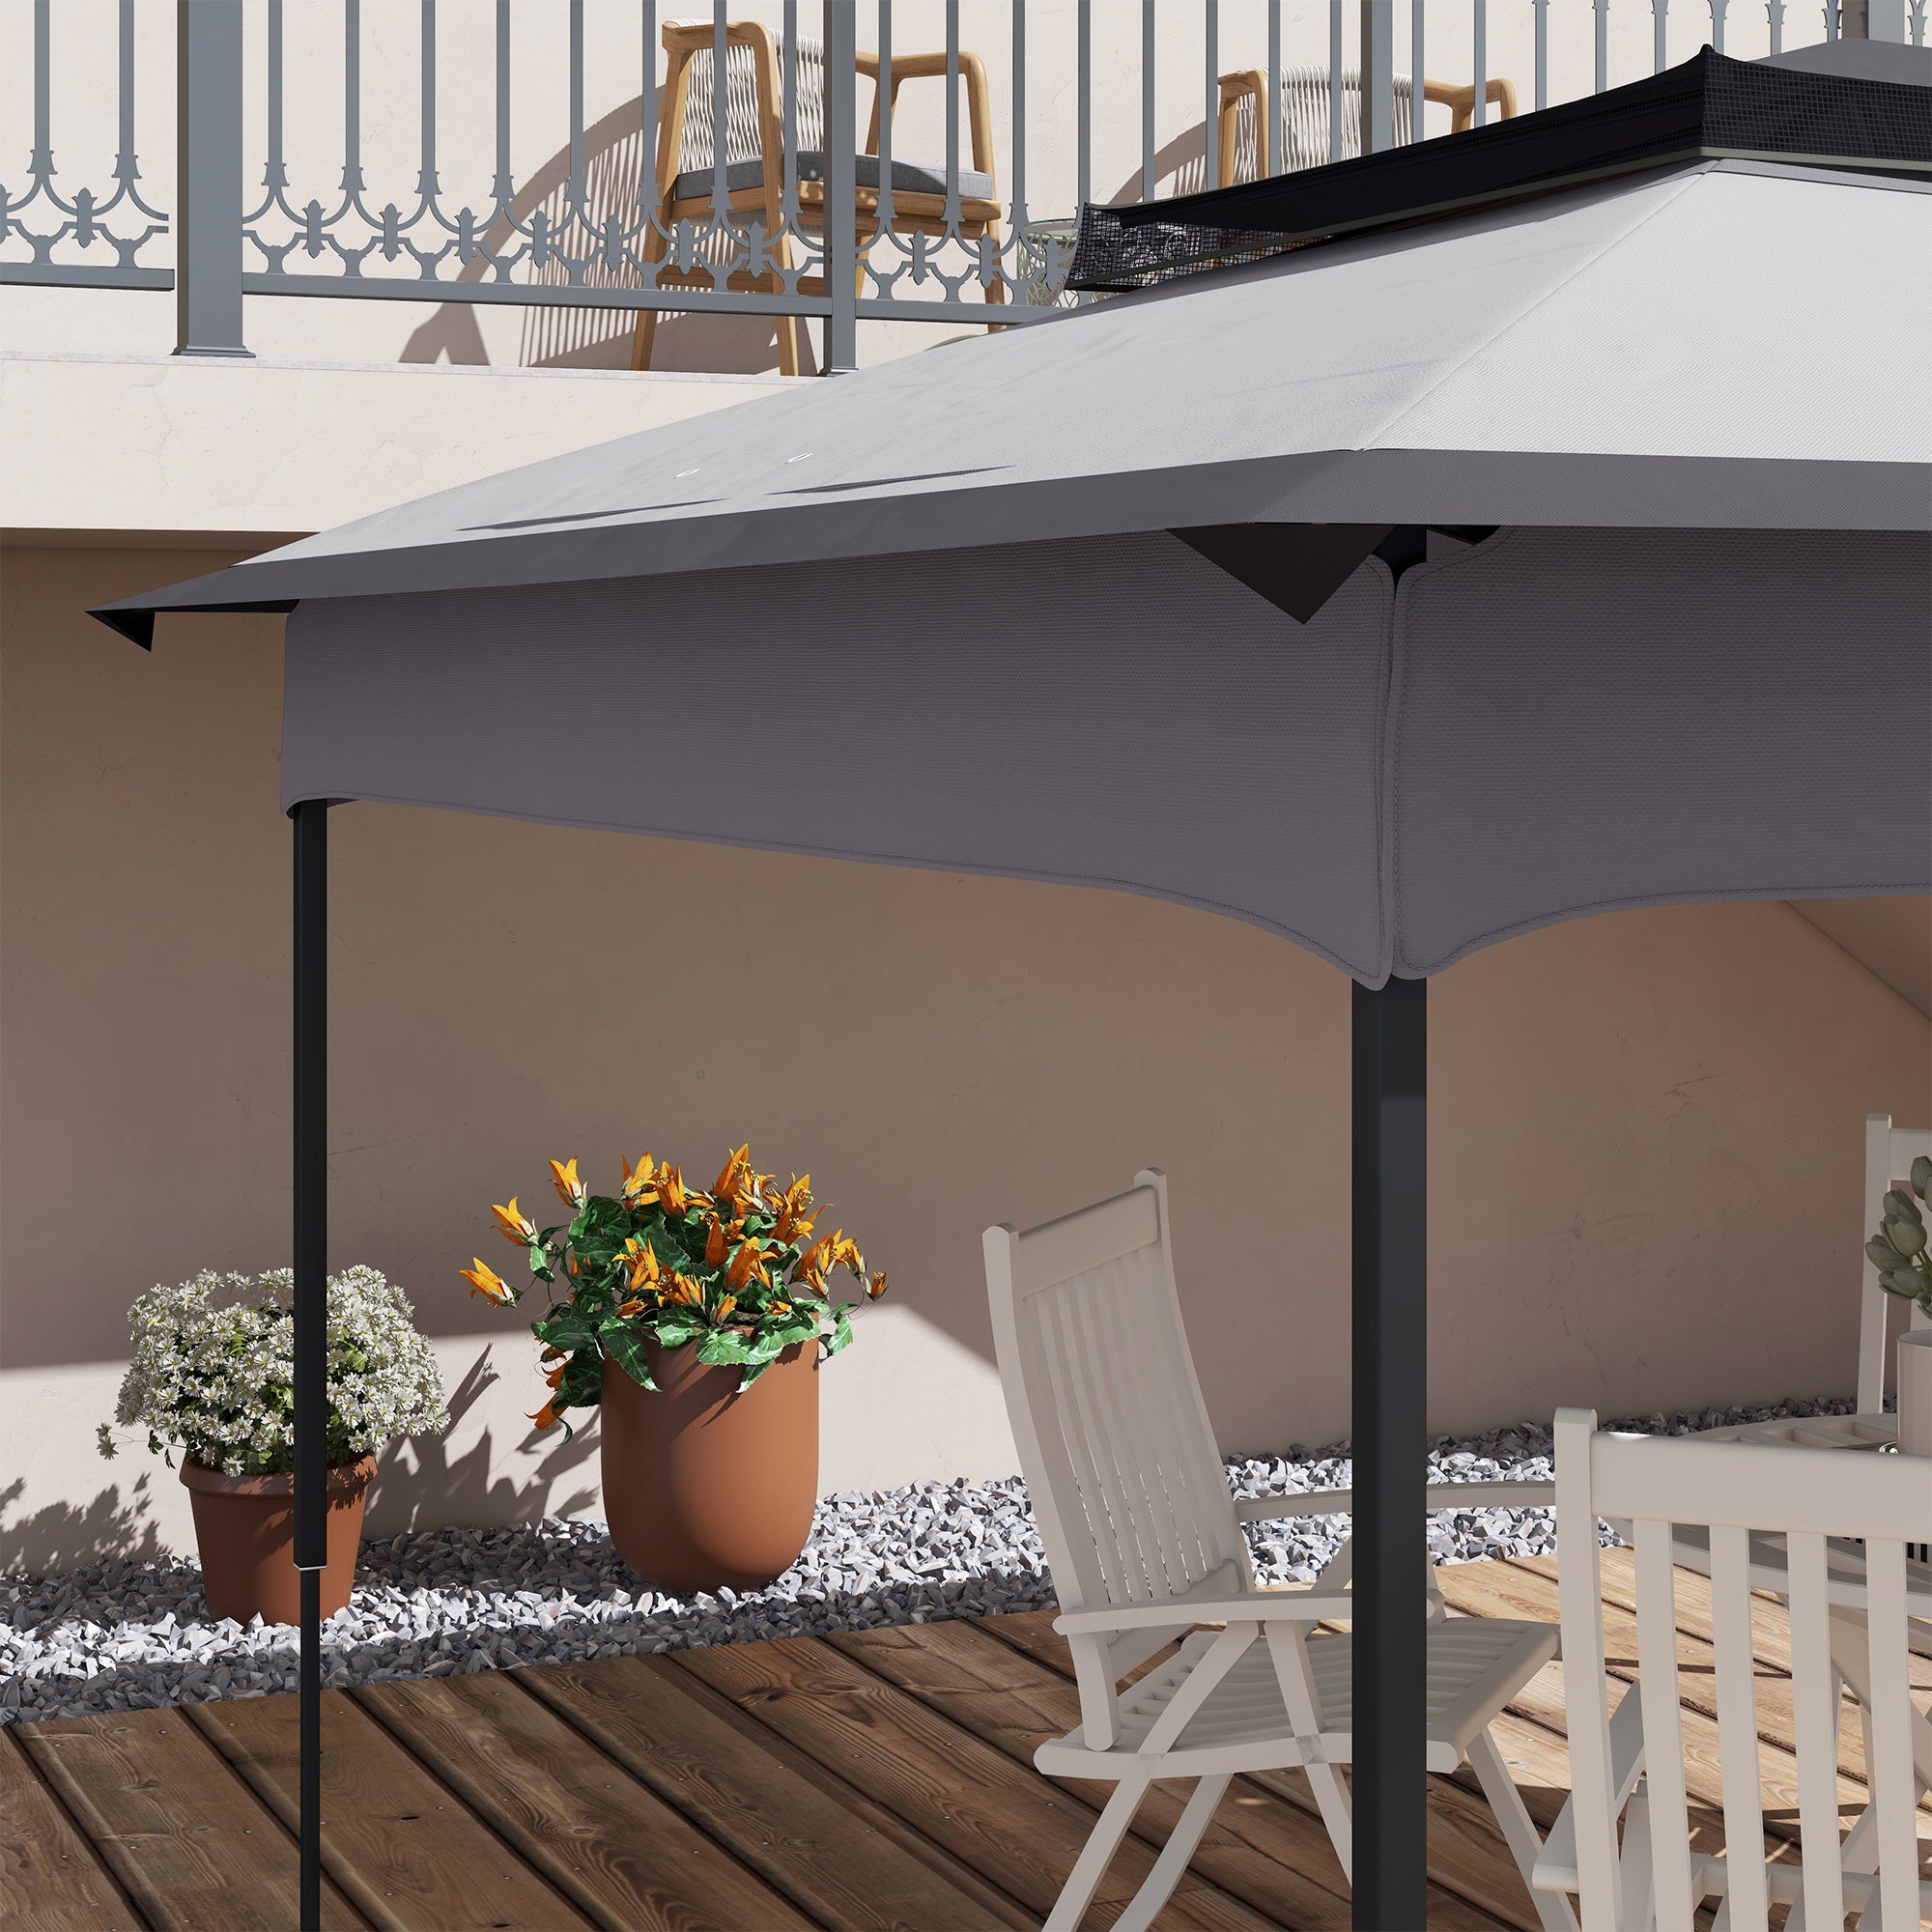 Outsunny Pop up Gazebo Cover, 2-Tier Gazebo Roof Replacement for 3.25m x 3.25m Frame, 30+ UV Protection, Grey